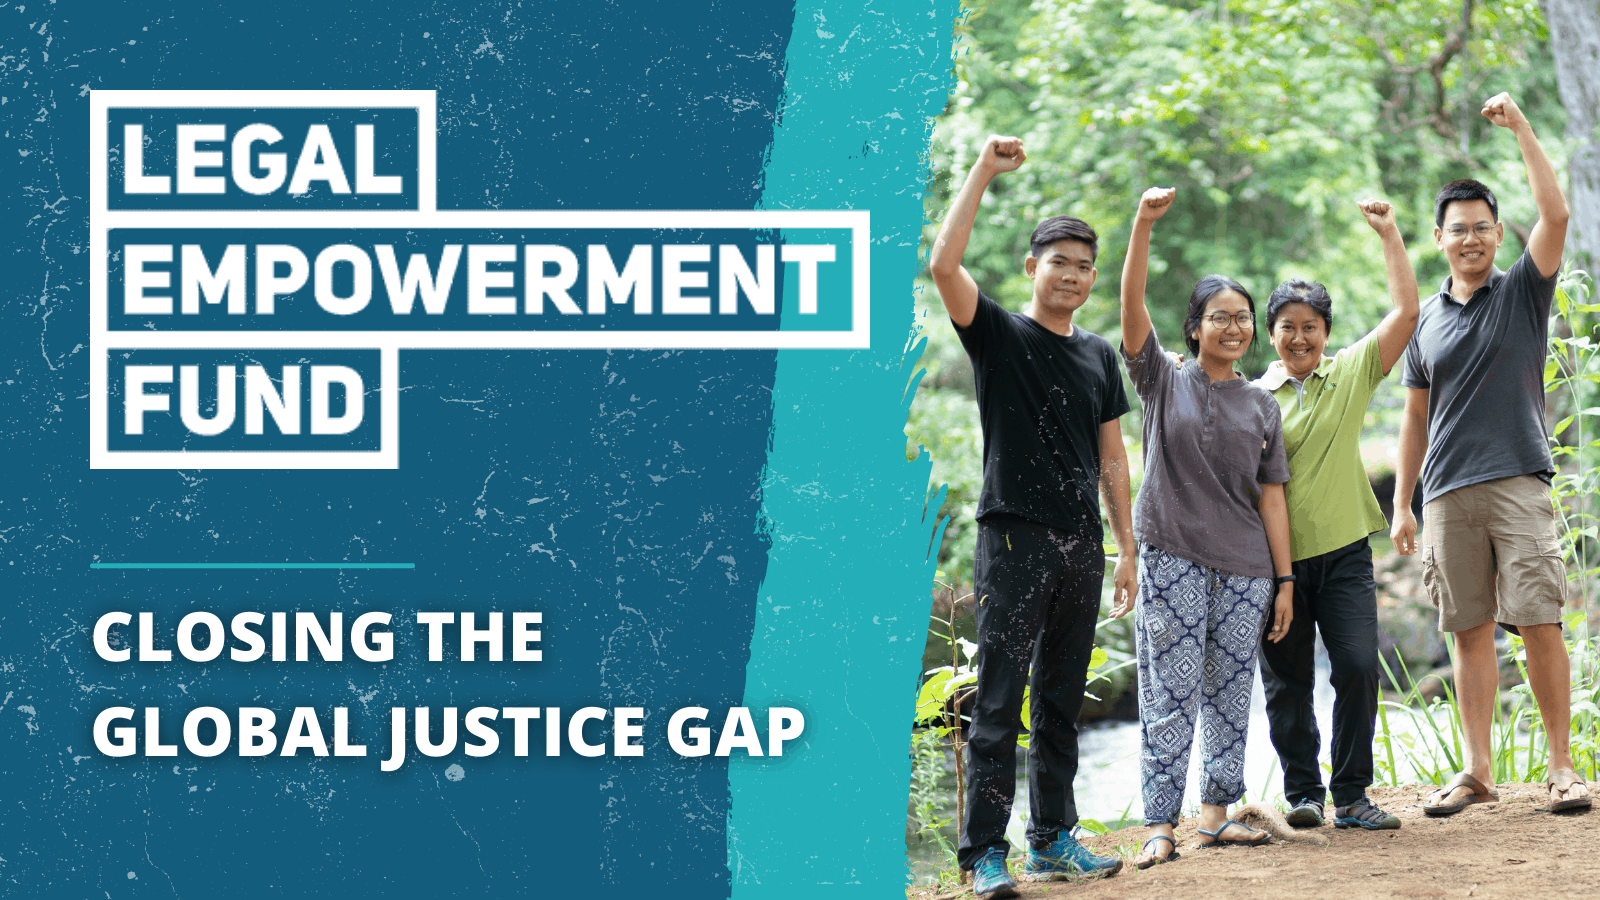 Philanthropic and Justice Leaders Launch Legal Empowerment Fund